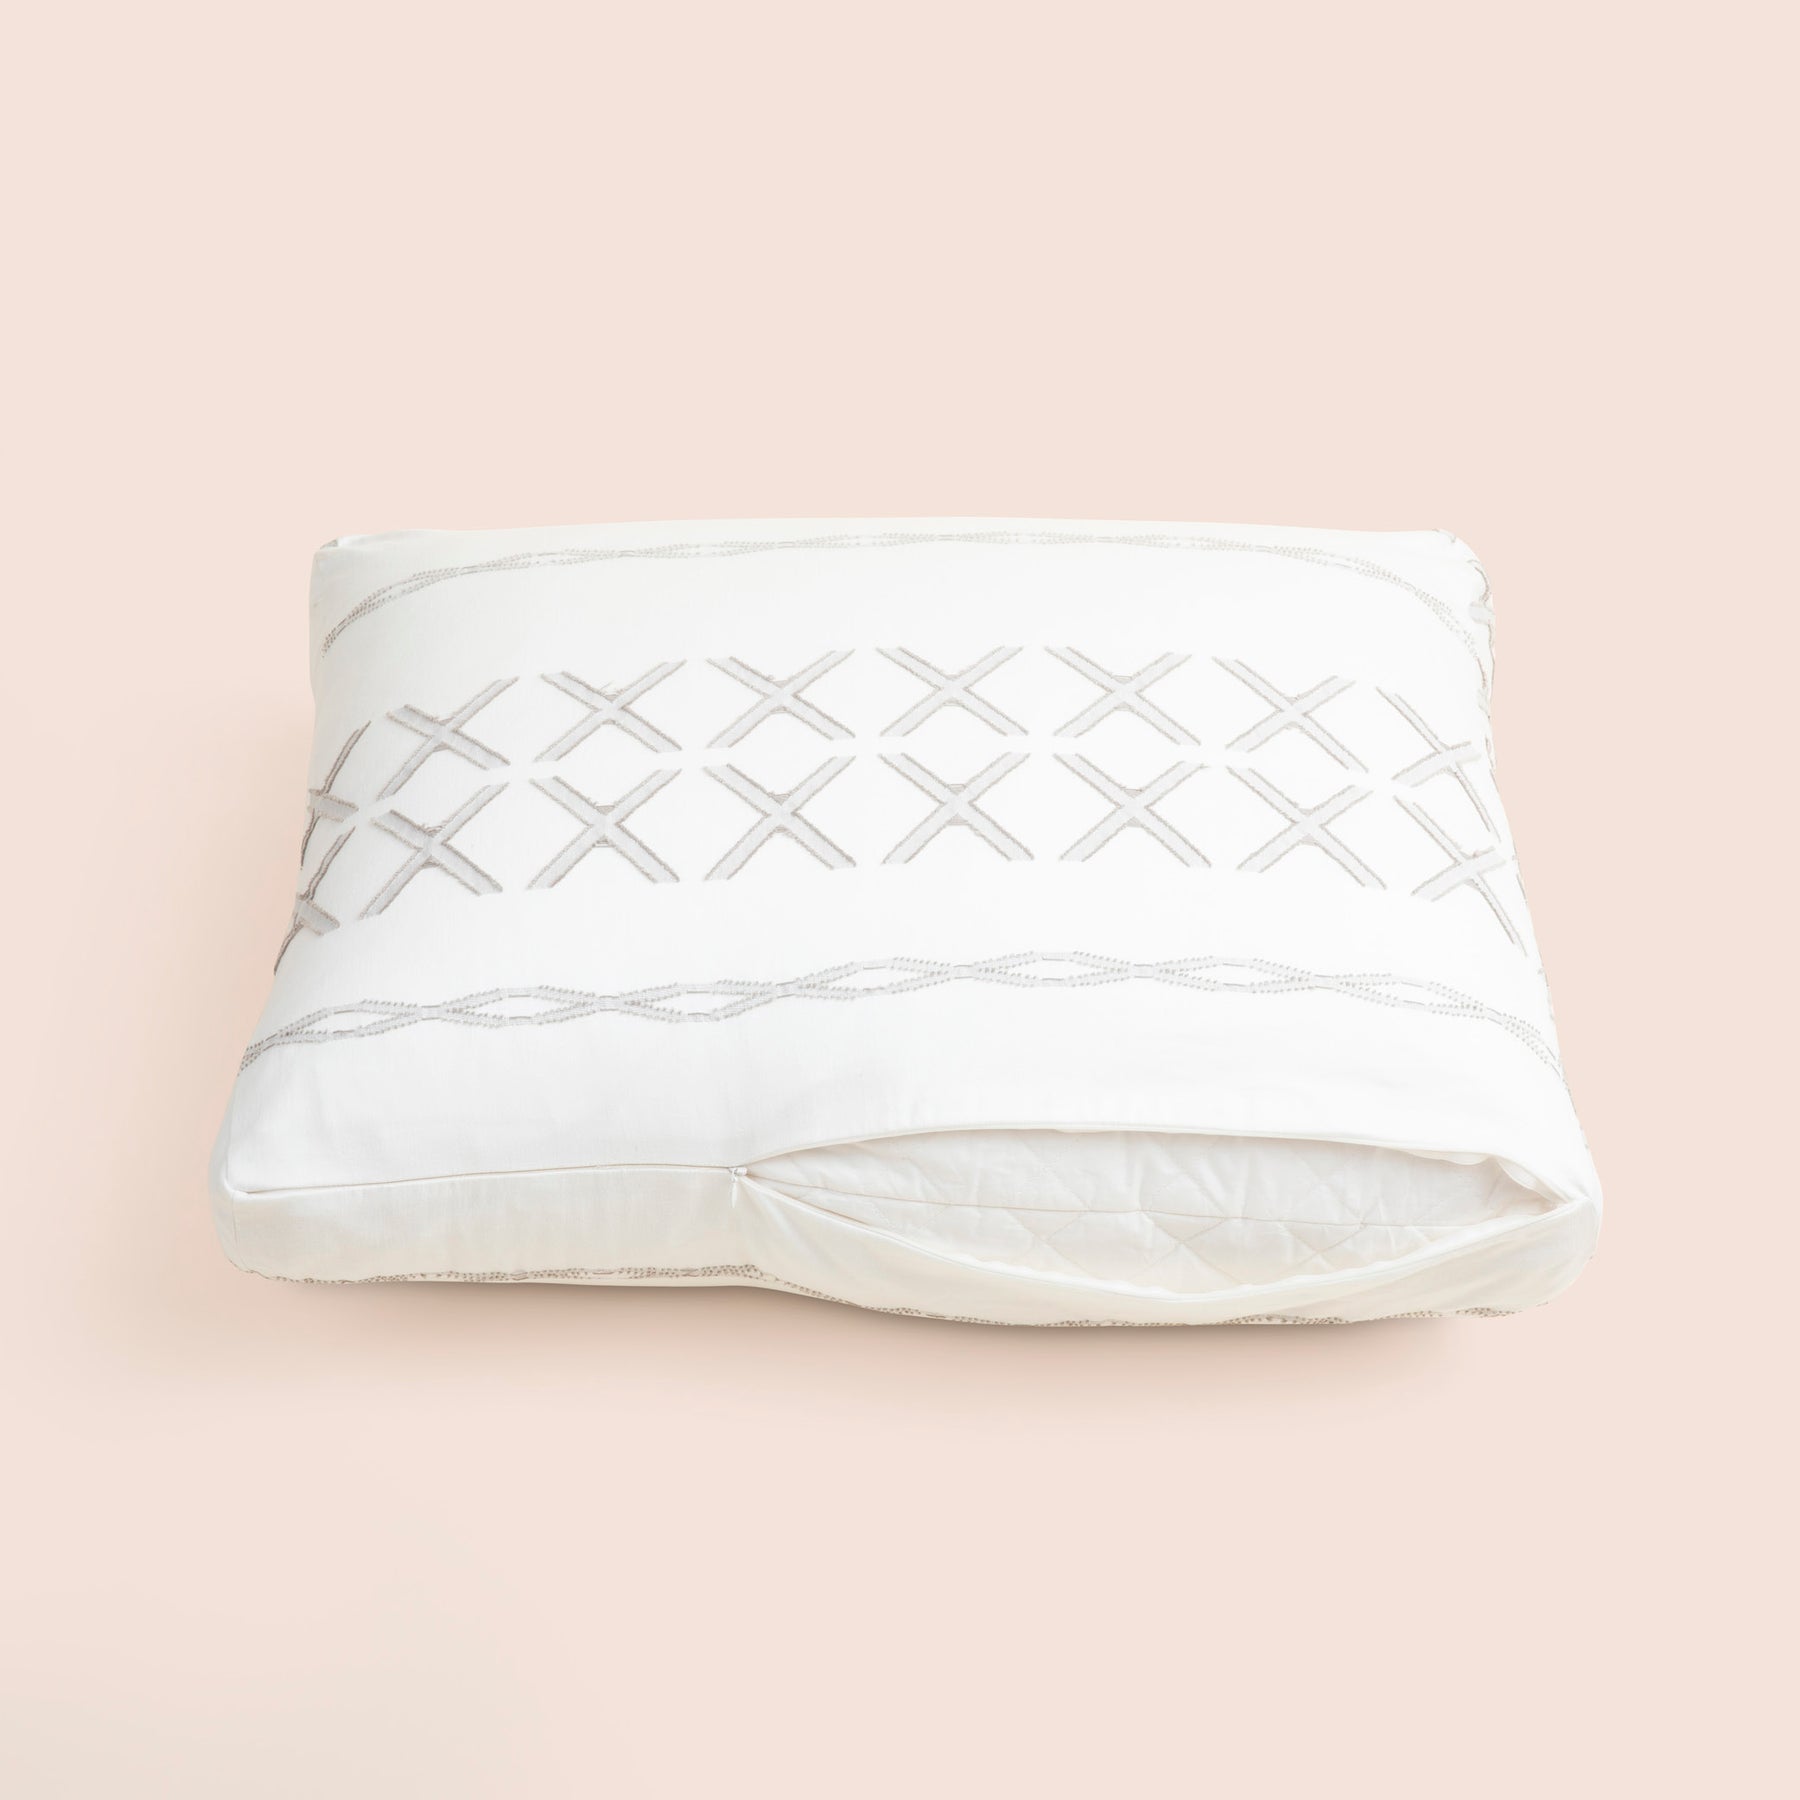 Image of the Sonoran Meditation Cushion Cover showcasing a slightly opened zipper with a meditation cushion inside on a light pink background 